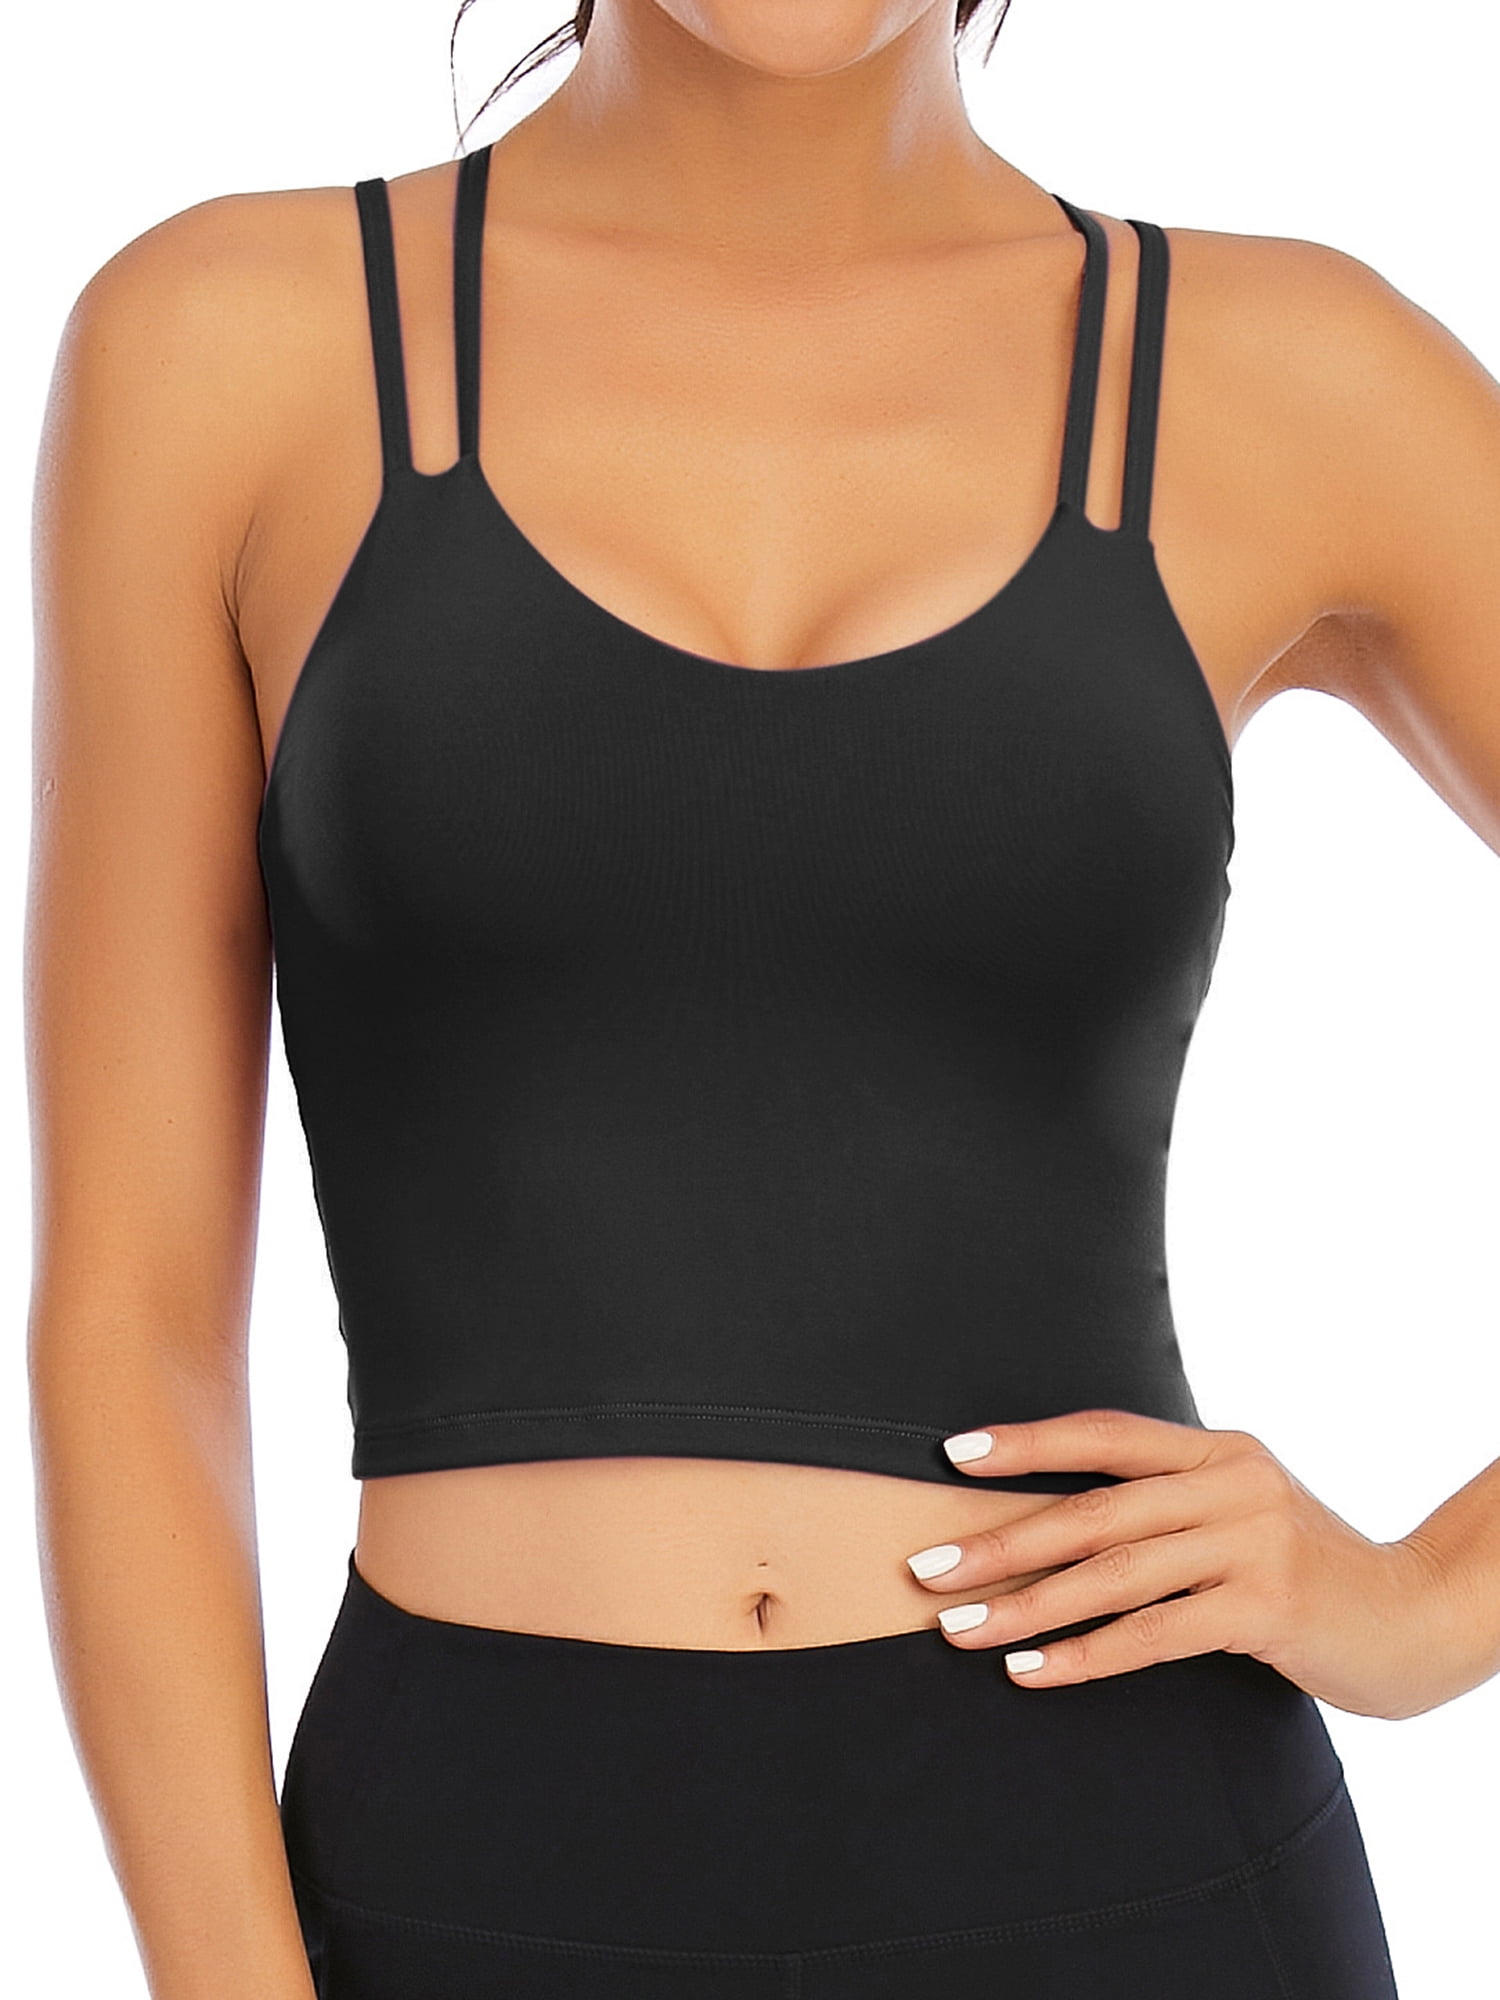 Meichang Crop Cami Tank Tops for Women Solid Color Slim Fit Athletic  Training Camisoles Tight Casual Yoga Gym Tanks Blouses